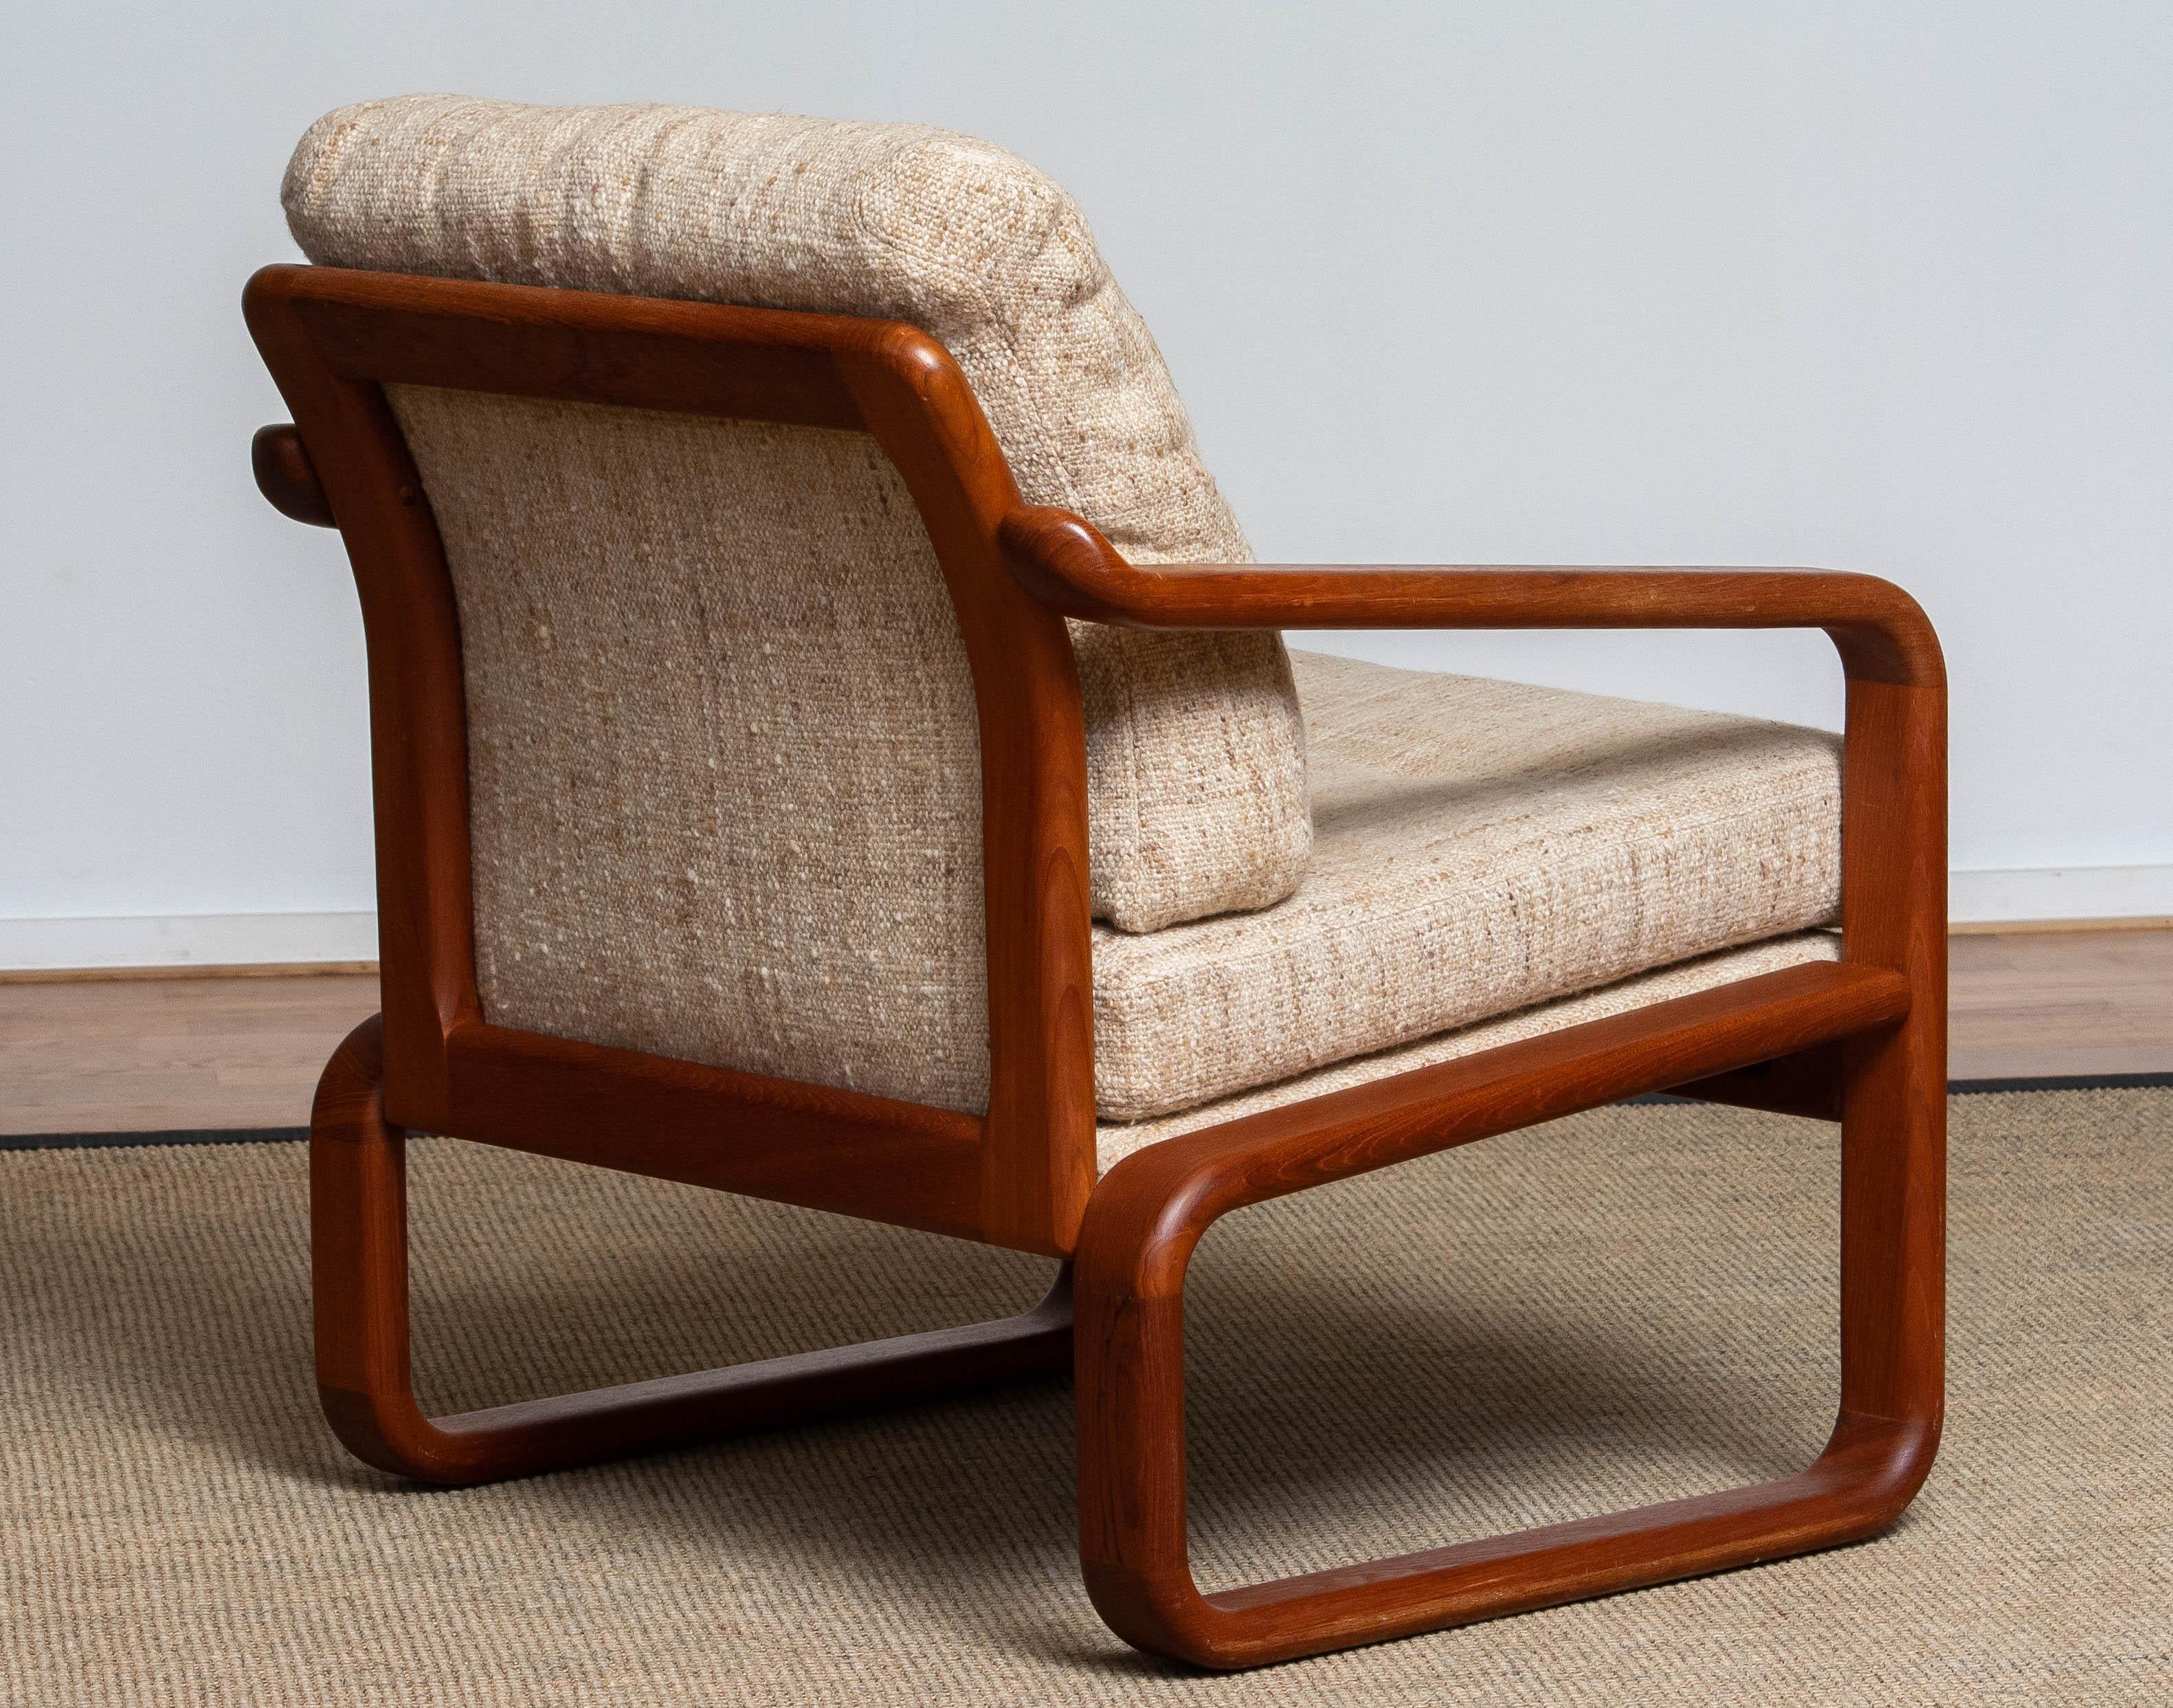 Danish 1980's Teak with Wool Cushions Lounge / Easy / Club Chair by Hs Design, Denmark For Sale